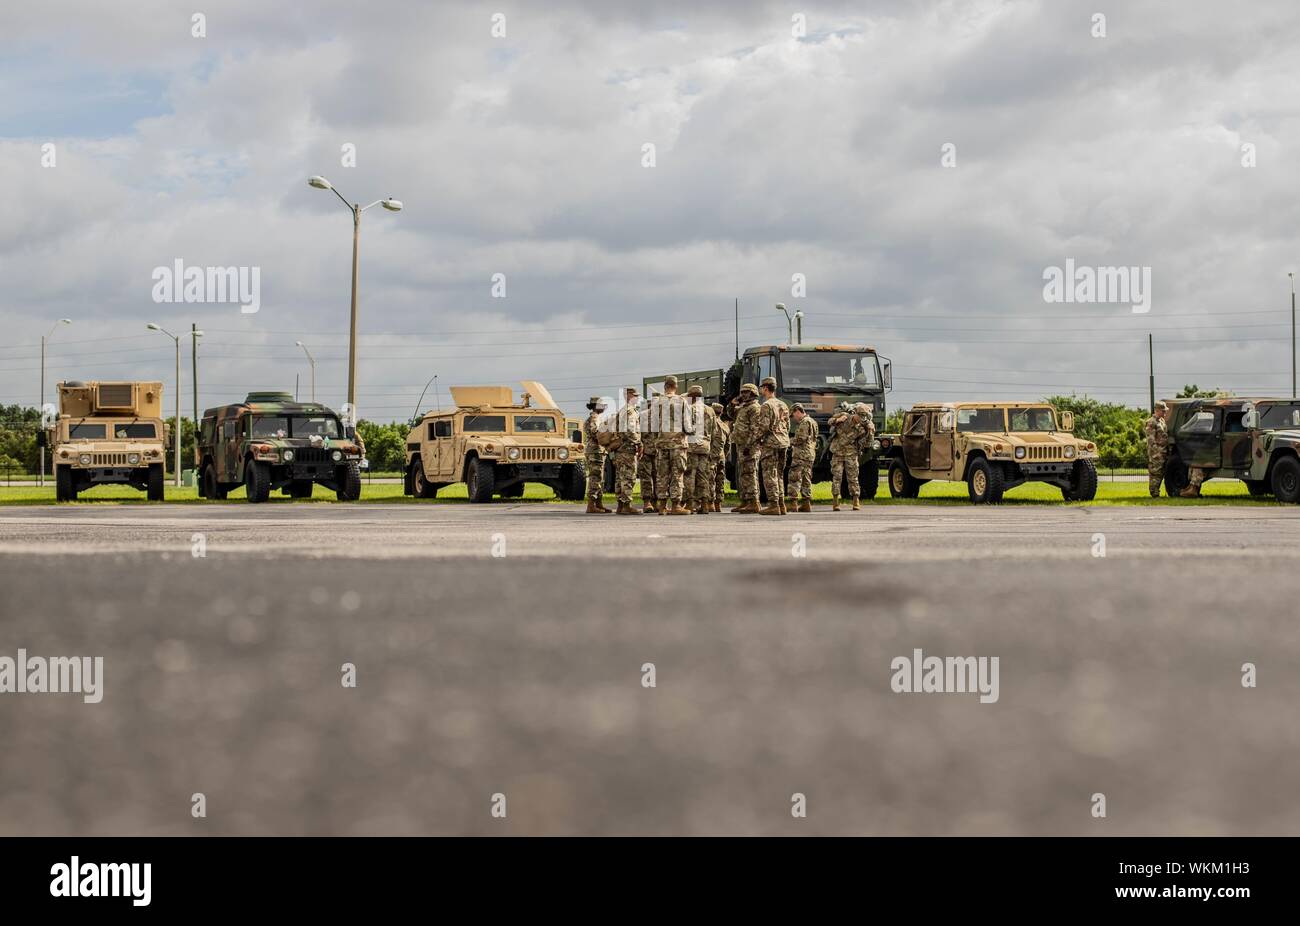 Kissimmee, Fla, September 3, 2019. - Florida National Guard Soldiers with the 753rd Brigade Engineer Battalion in Tallahassee, Florida, gather together after staging their vehicles, Sept. 3, 2019. The 753rd is staging their vehicles and Soldiers in preparation to respond to Hurricane Dorian. () Stock Photo